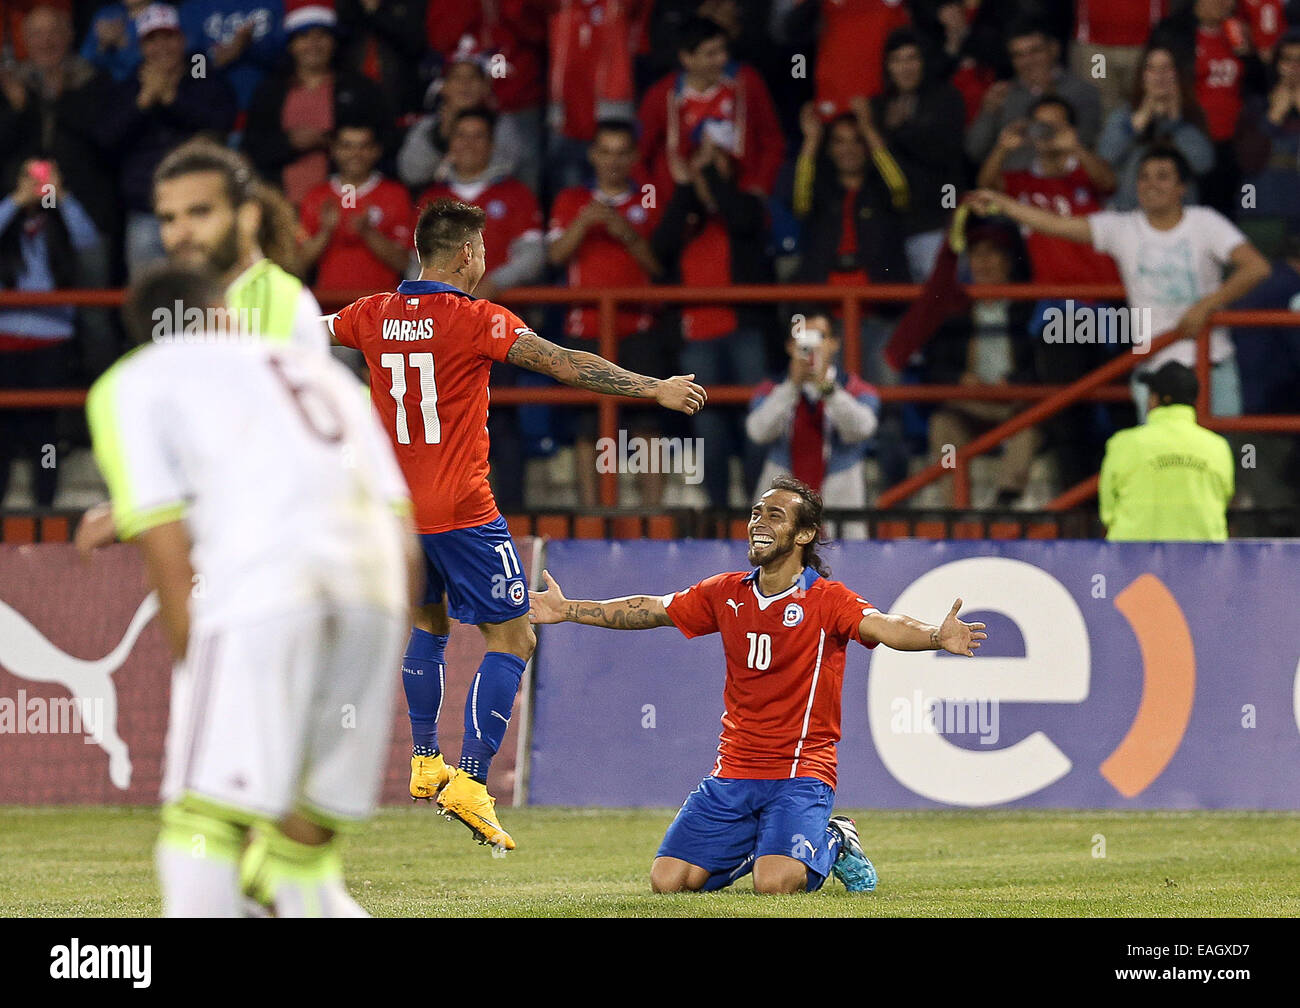 Talcahuano, Chile. 14th Nov, 2014. Image provided by the National Asociation of Professional Soccer shows Chile's Jorge Valdivia (R) celebrating during a friendly match with Venezuela in Talcahuano, Chile, Nov. 14, 2014. © ANFP/Xinhua/Alamy Live News Stock Photo